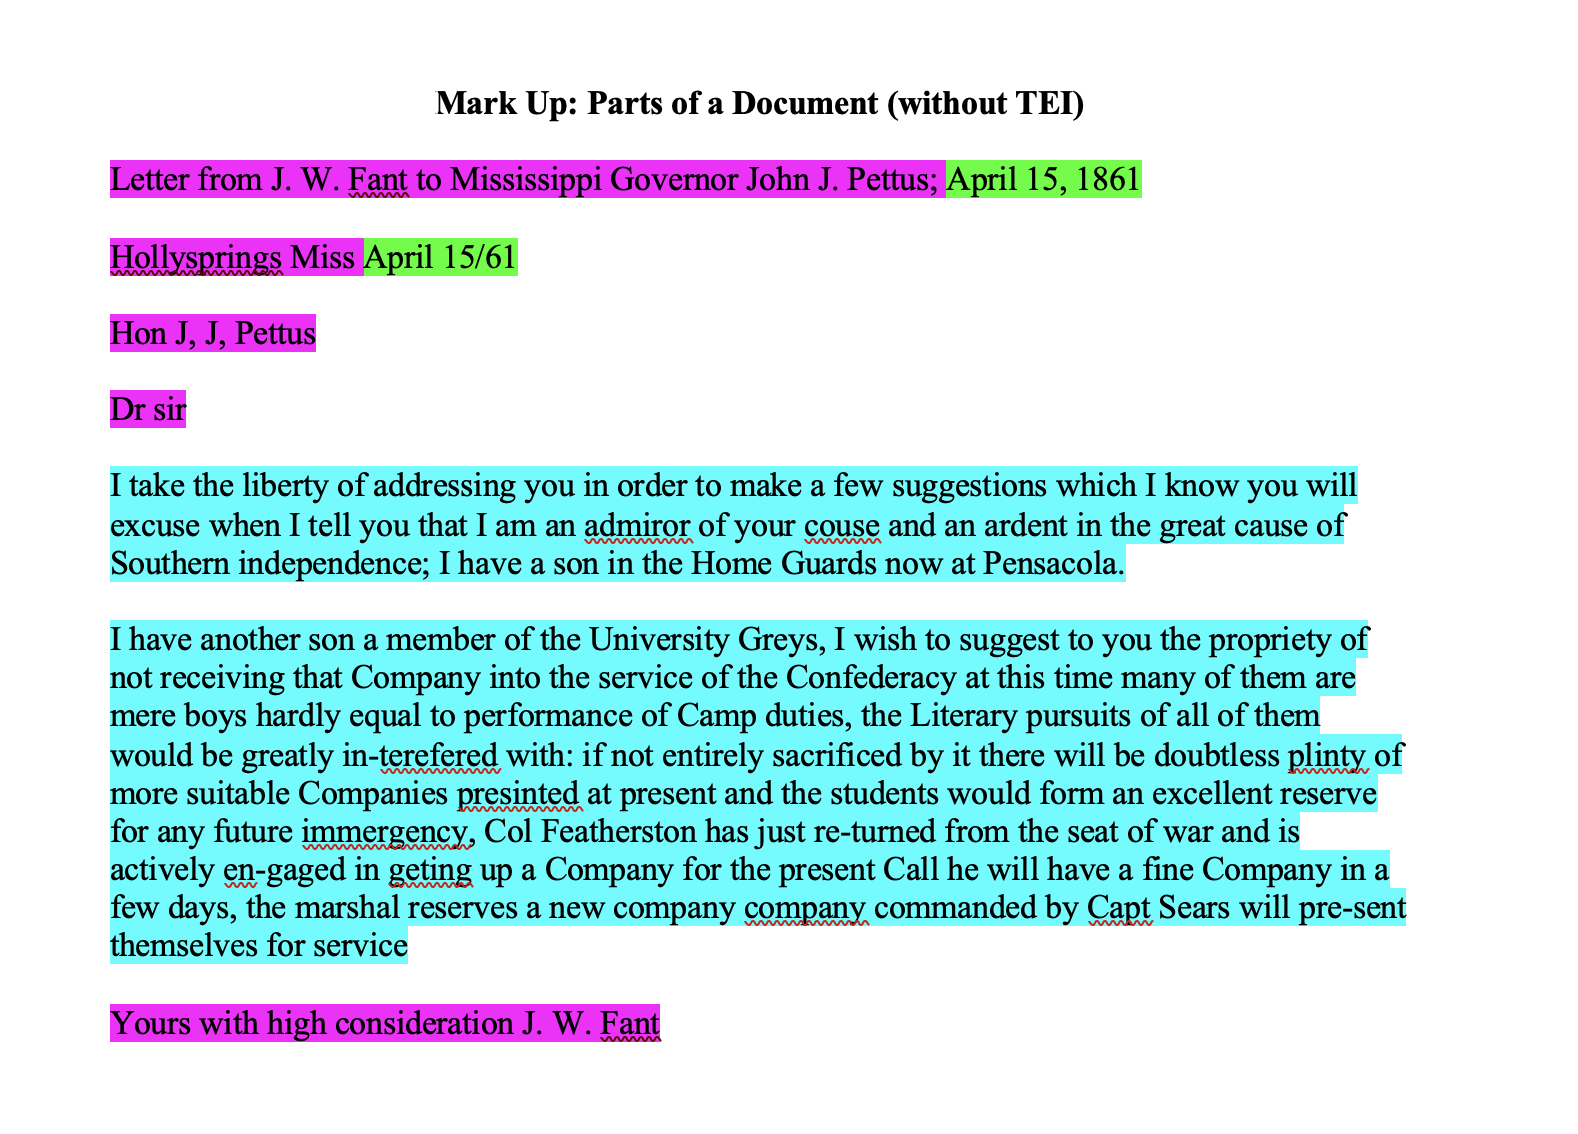 Figure 6: Screen capture of the Fant letter where the header and closer are highlighted in pink, dates in green, and paragraphs in blue